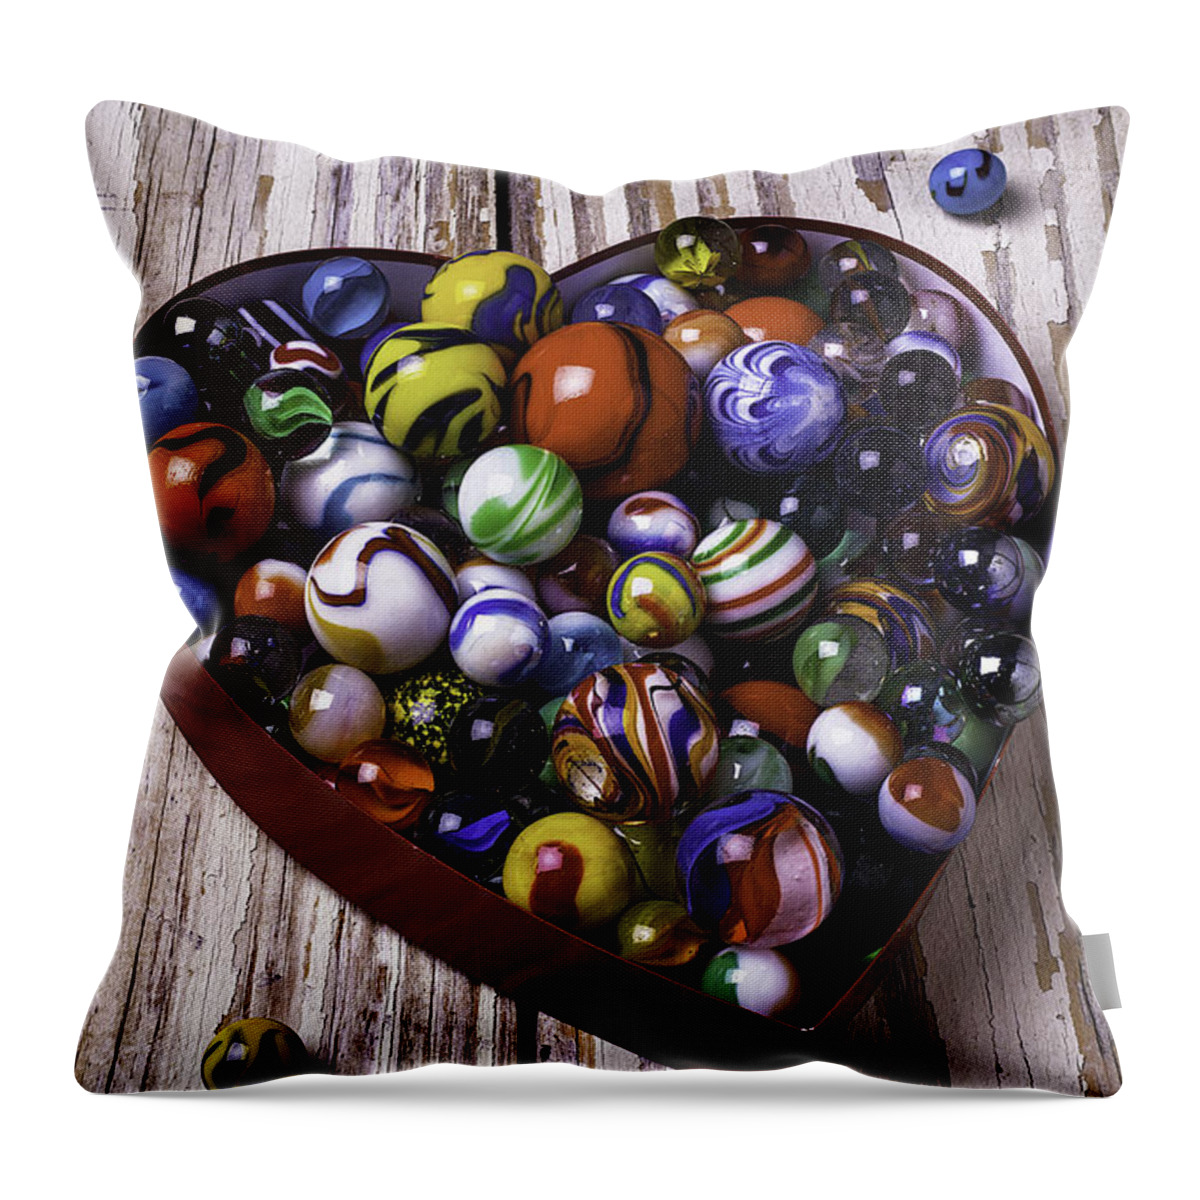 Marbles Throw Pillow featuring the photograph Heart Box With Marbles by Garry Gay